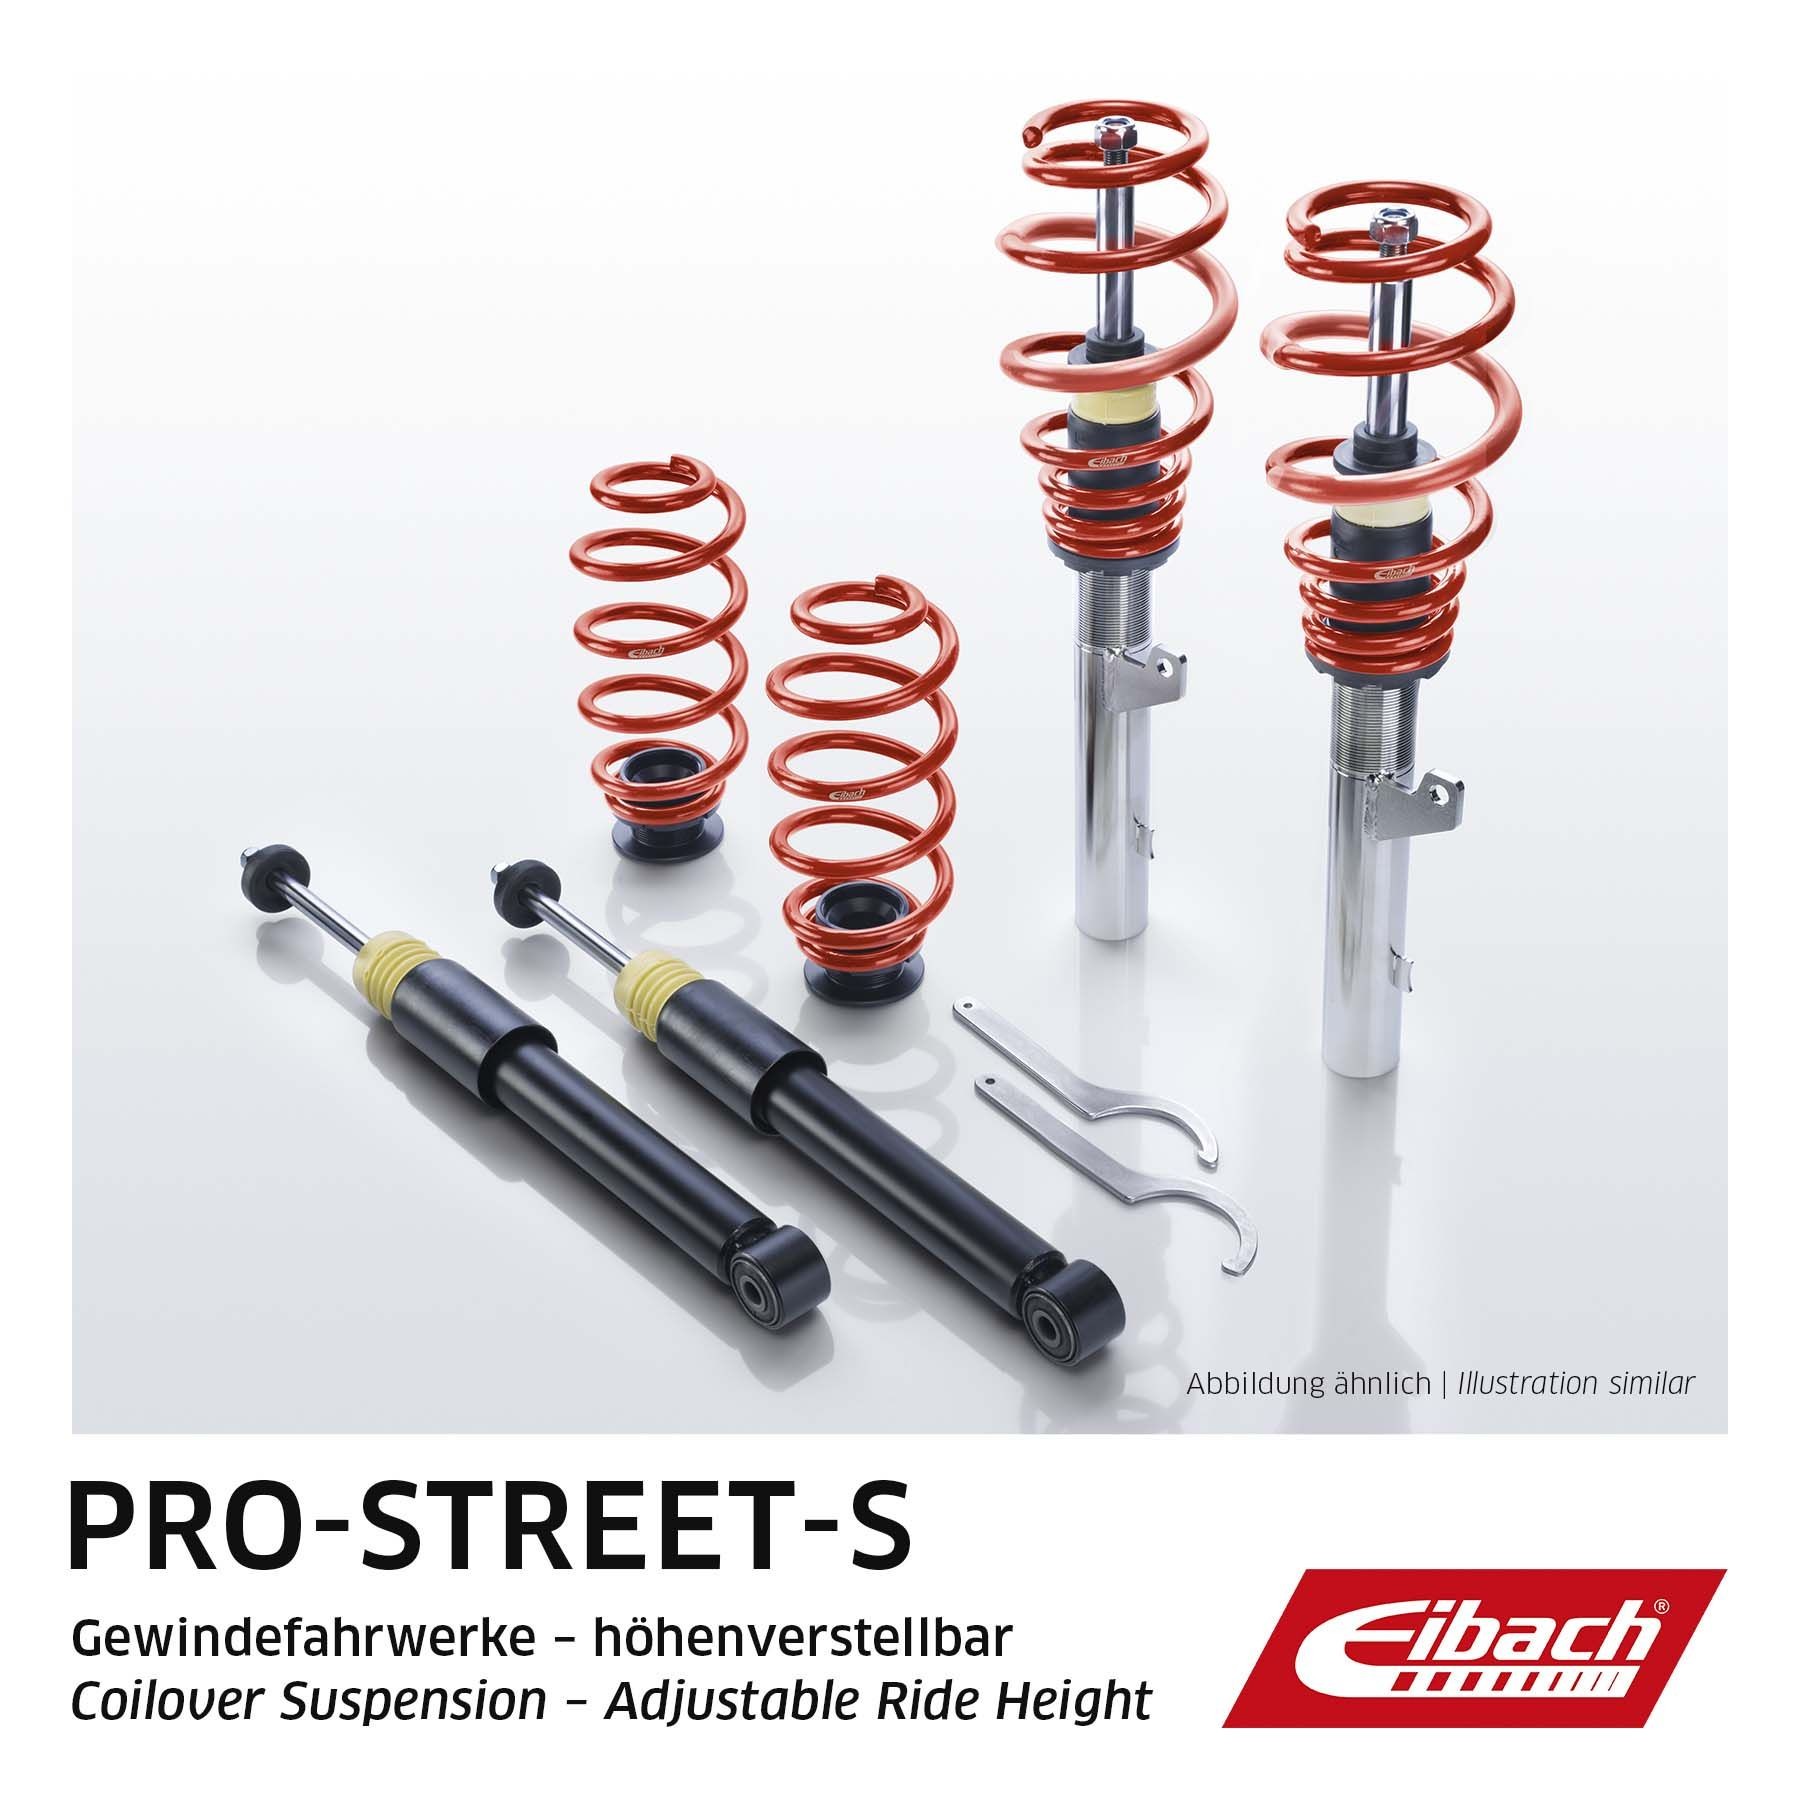 EIBACH Suspension kit, coil springs / shock absorbers VW Golf Mk5 new PSS65-85-014-04-22